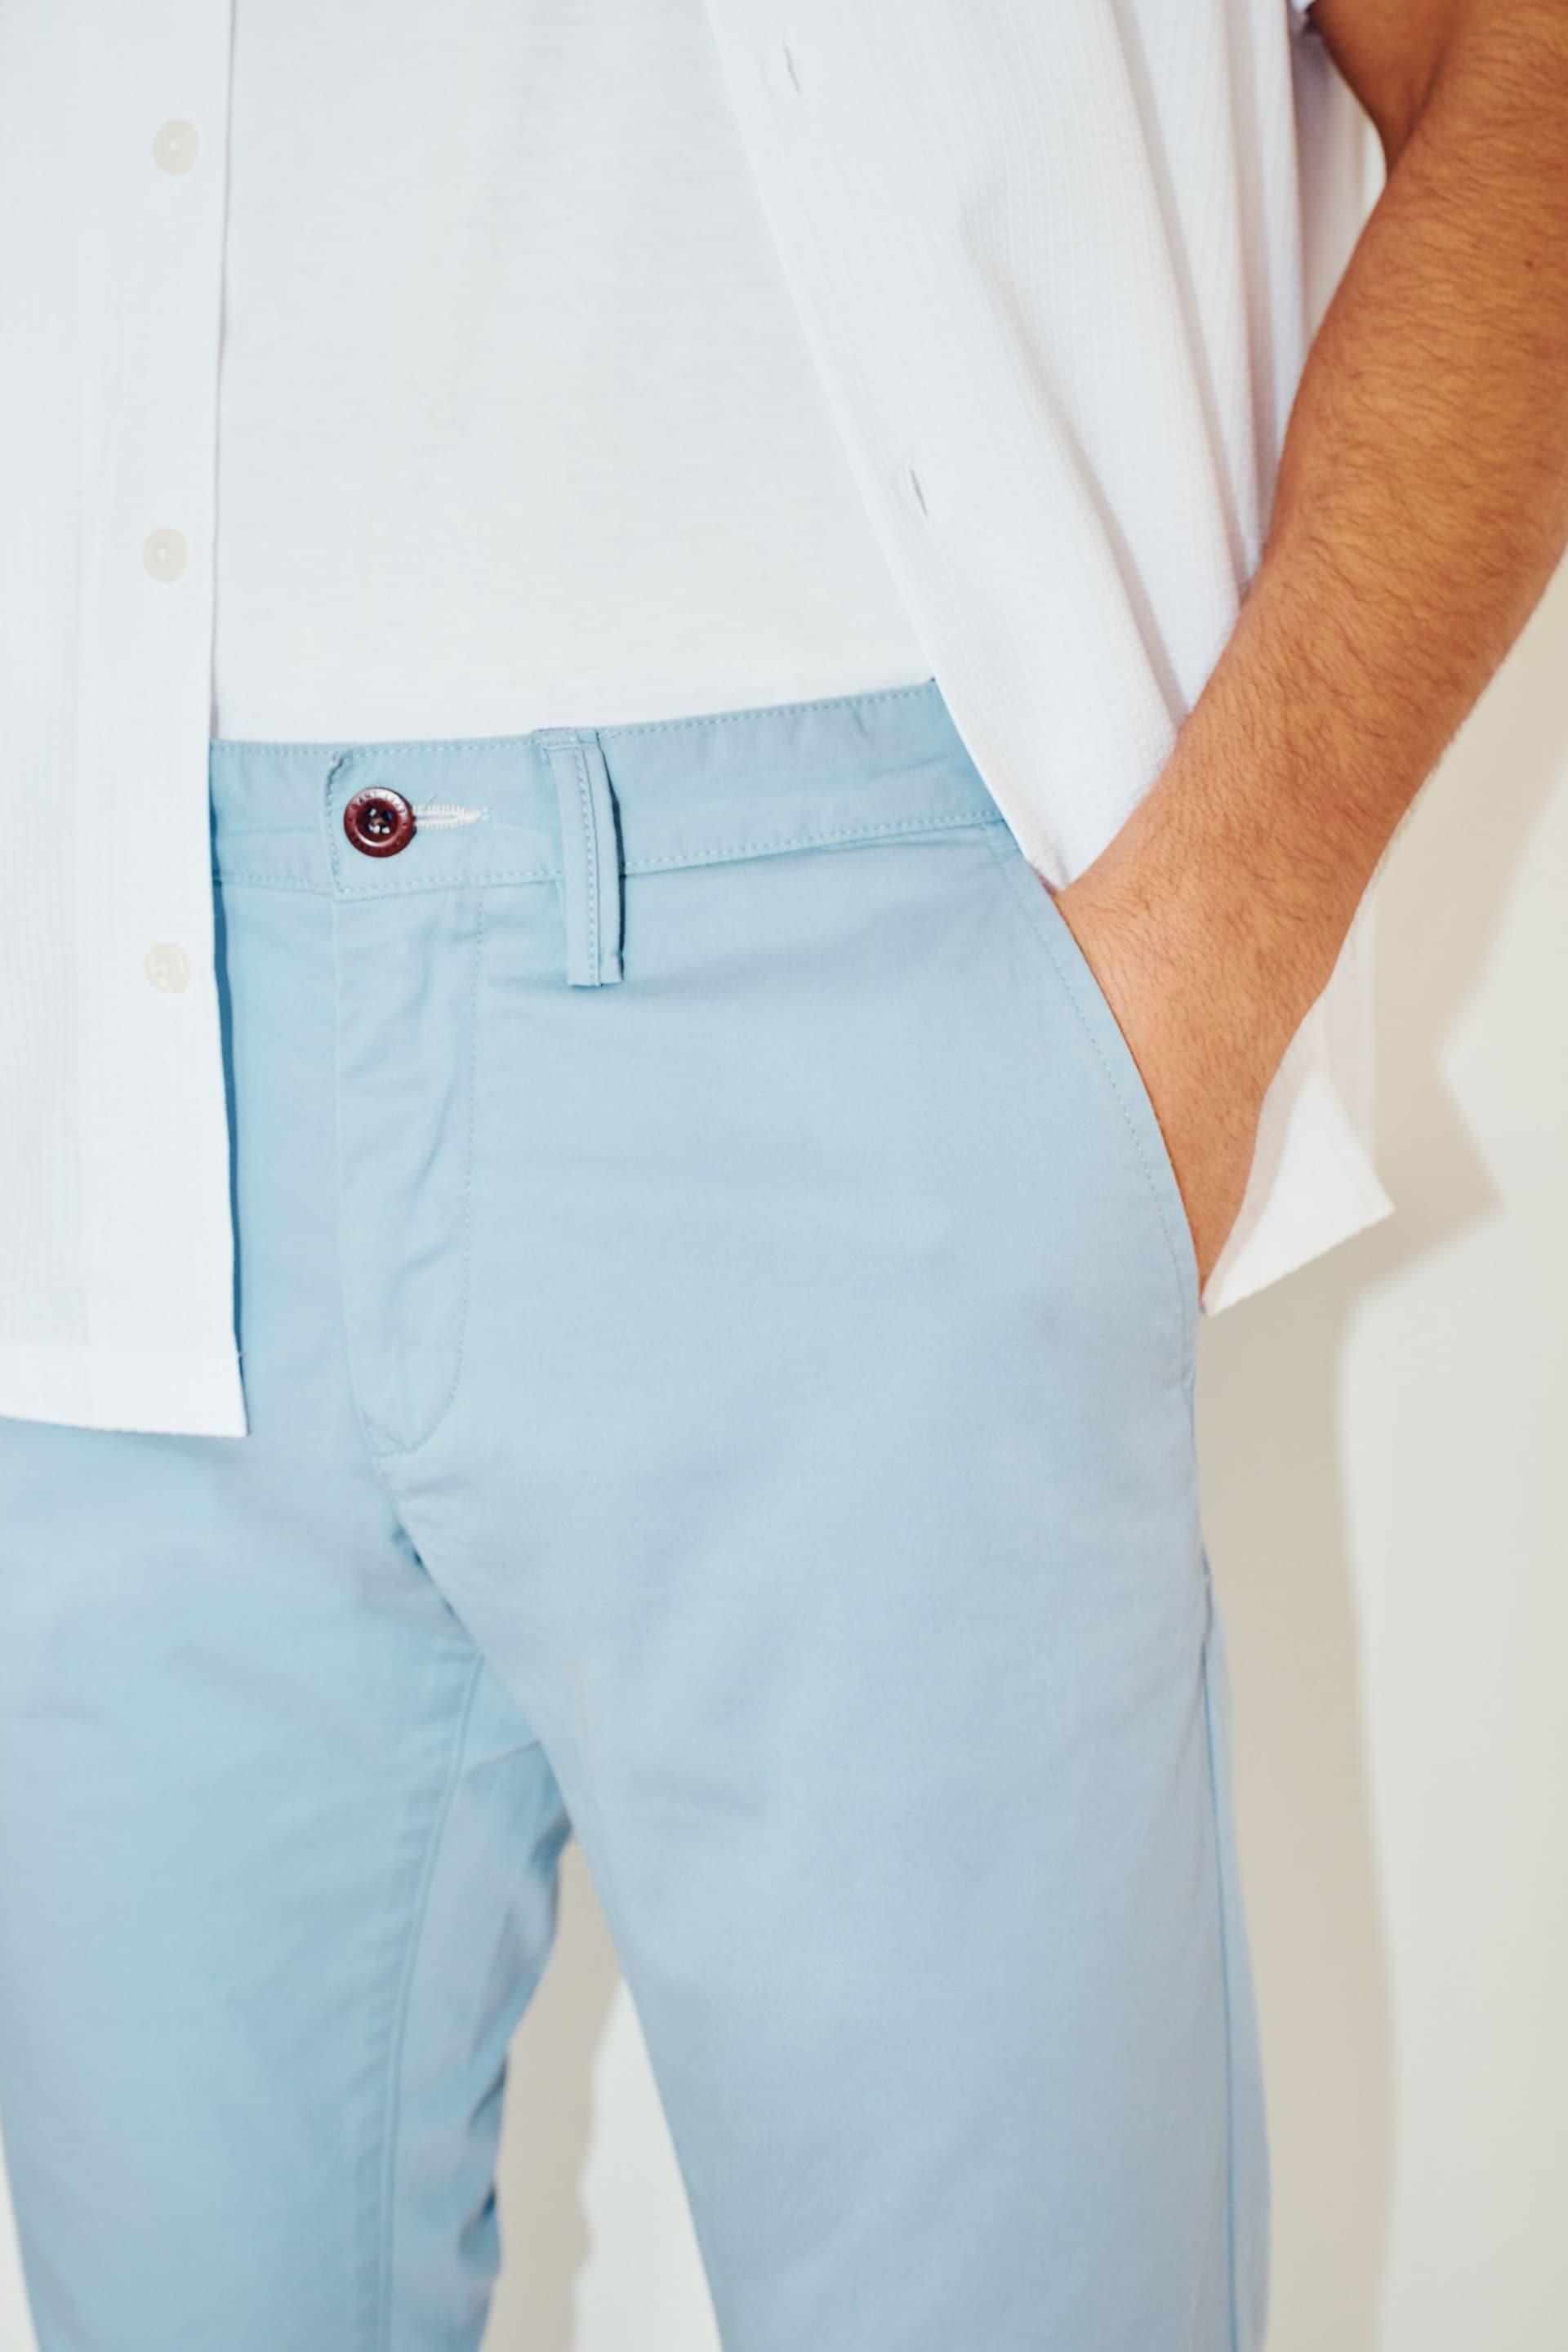 GANT Slim Fit Cotton Twill Chinos Trousers - Image 4 of 5